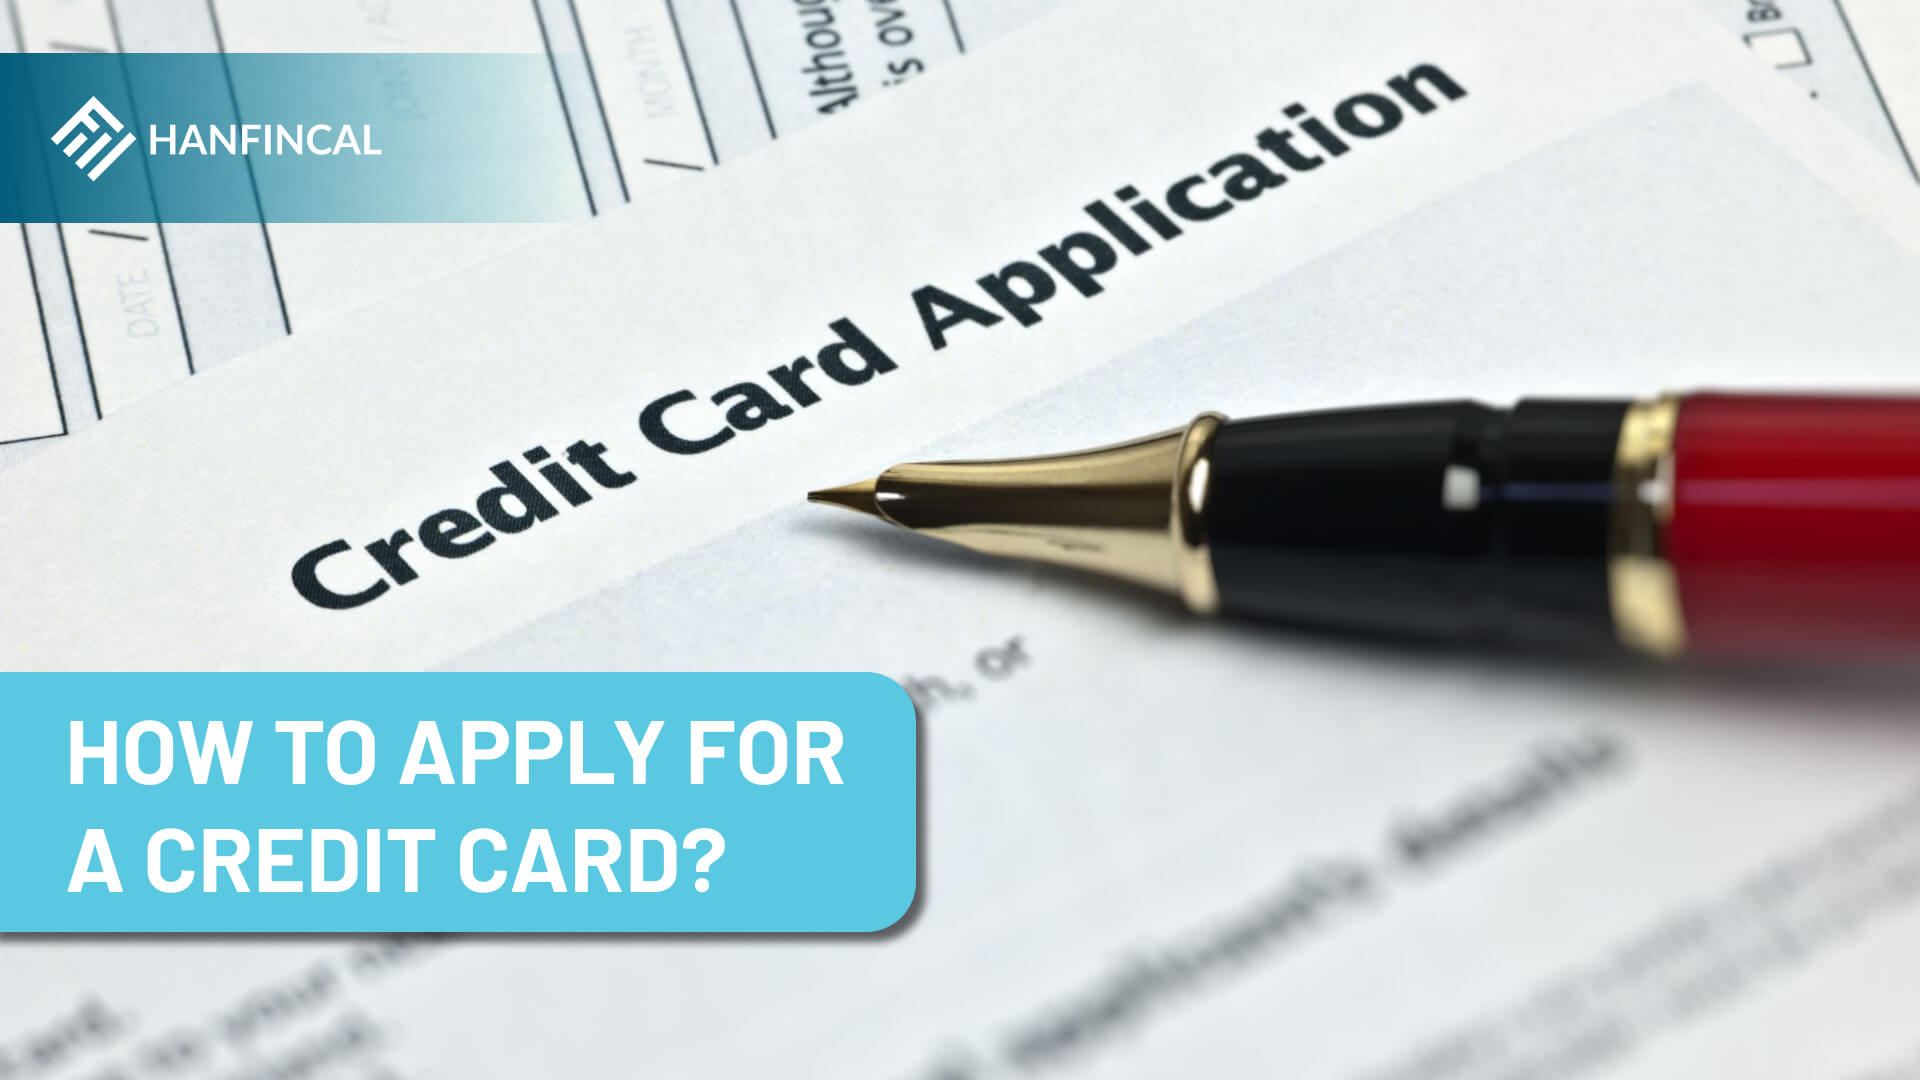 How to apply for a credit card?